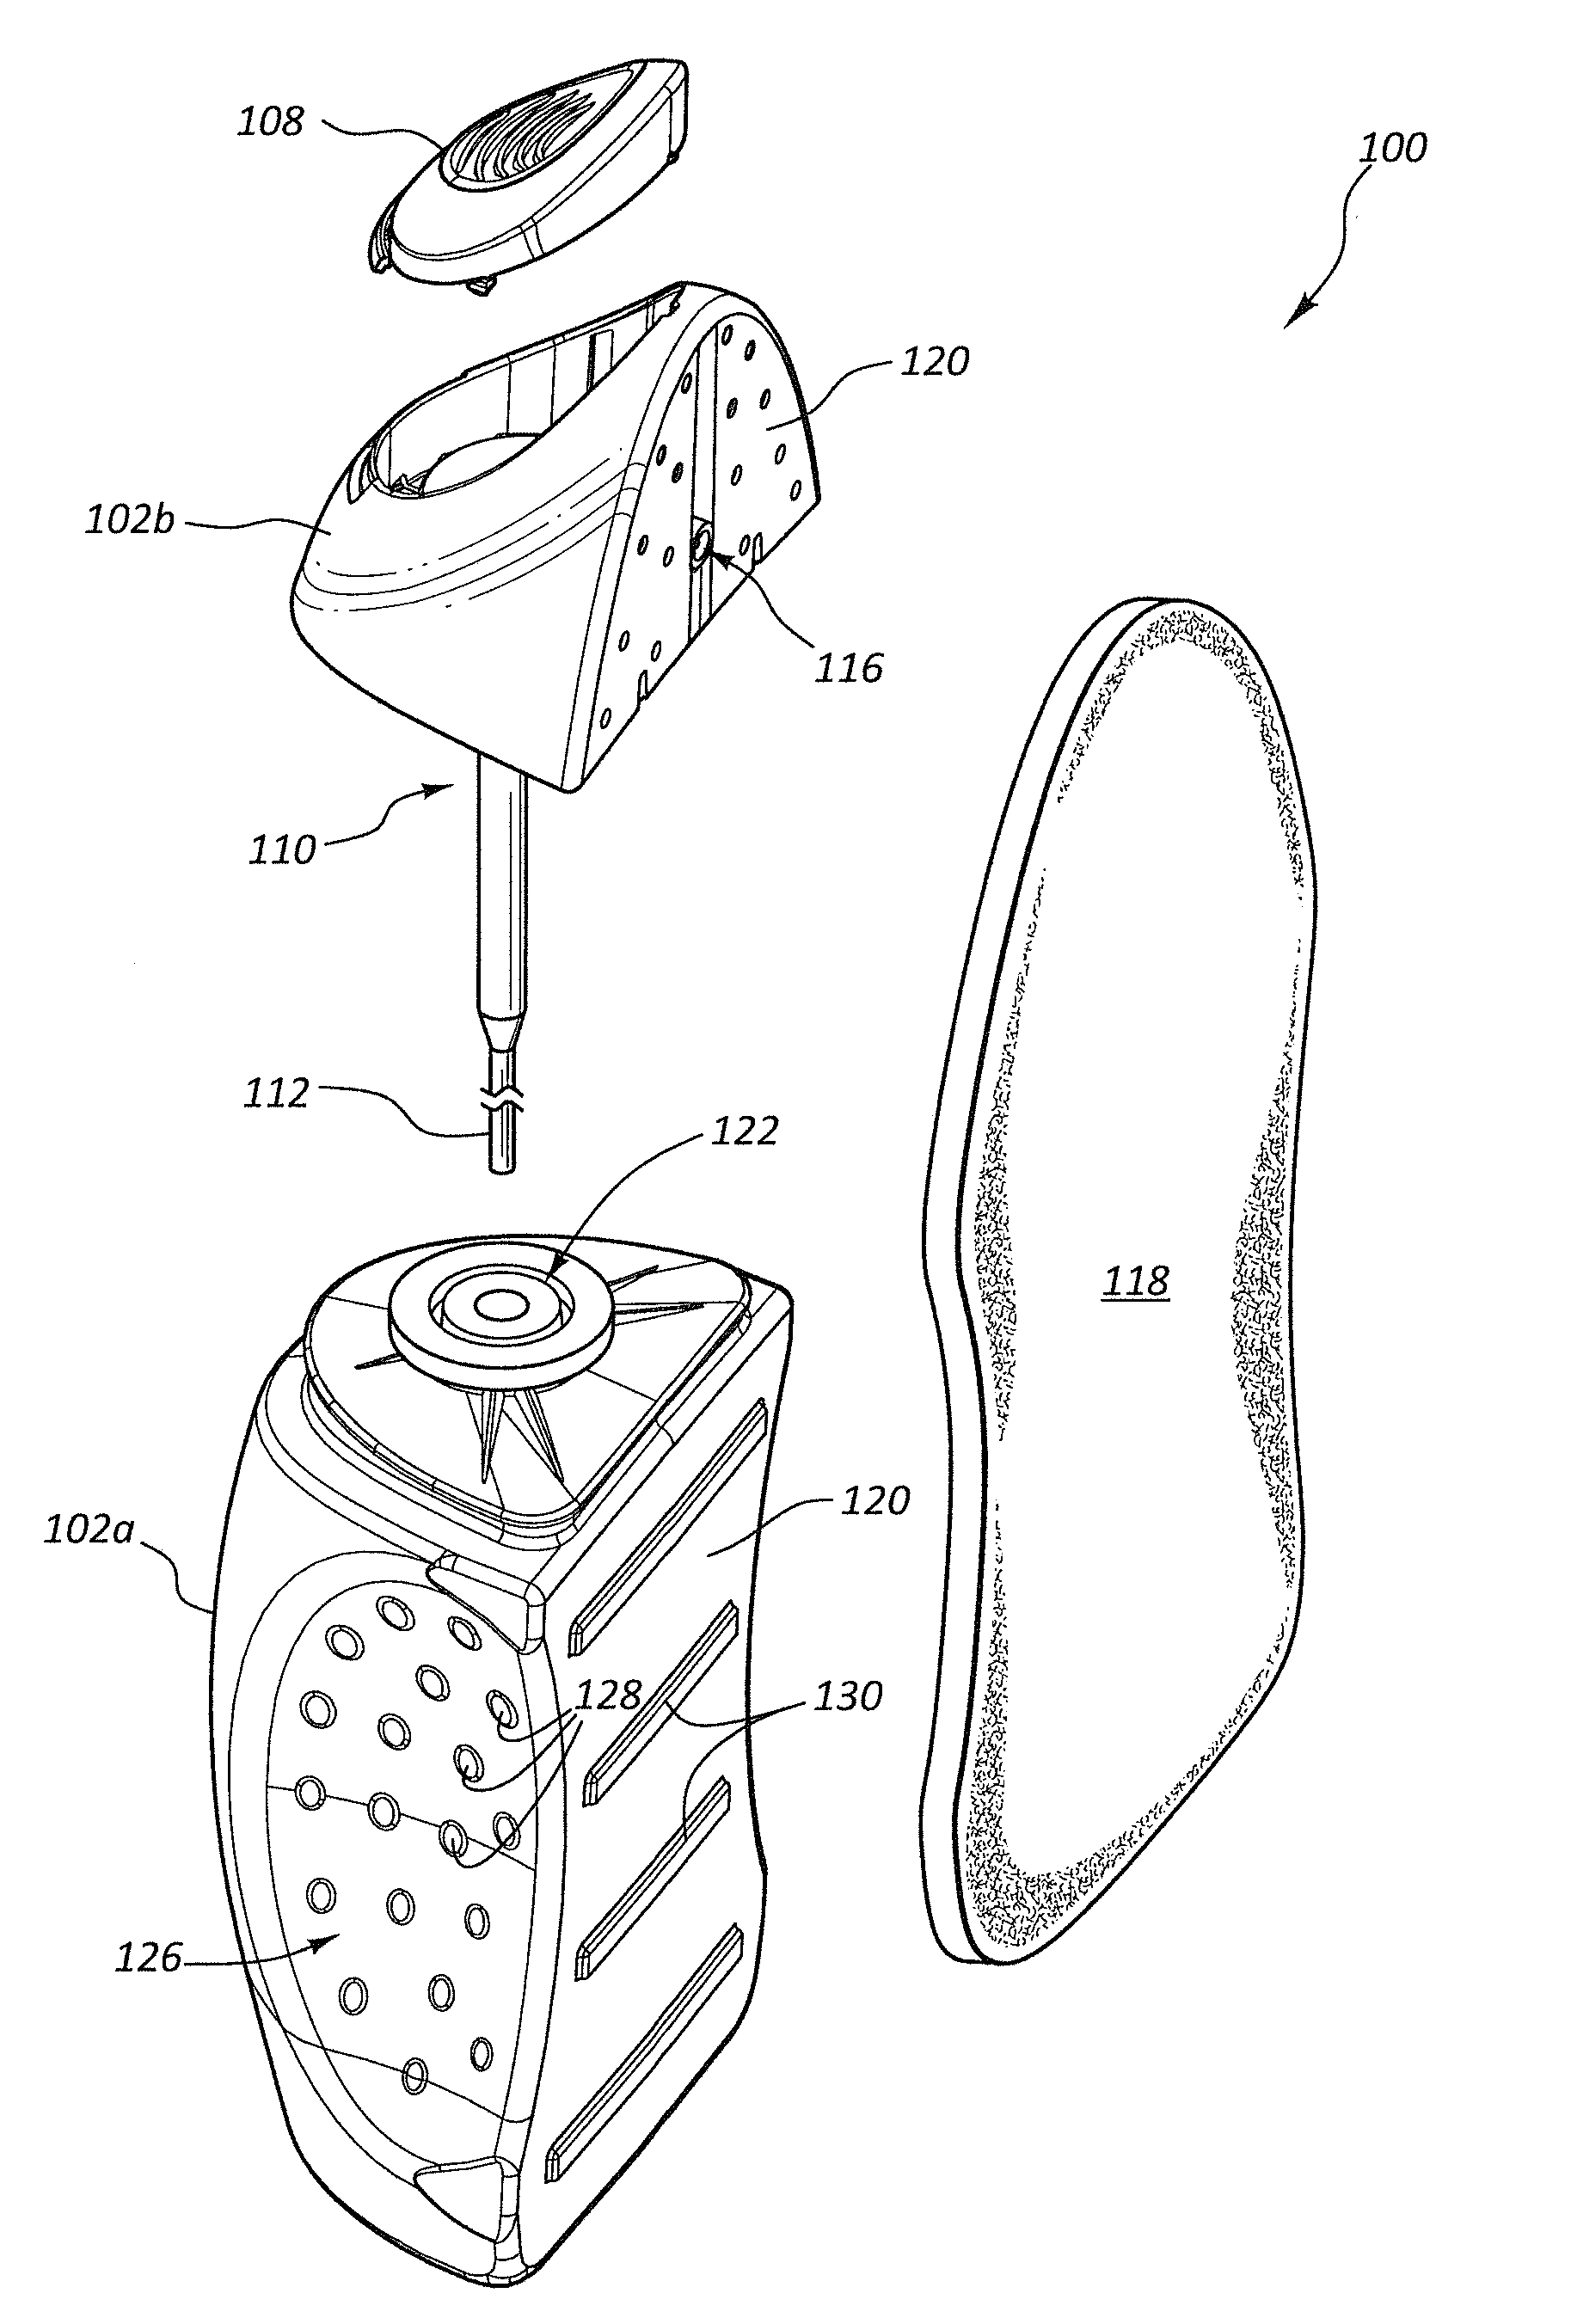 Article for scrubbing and cleaning hard surfaces and a method for use thereof